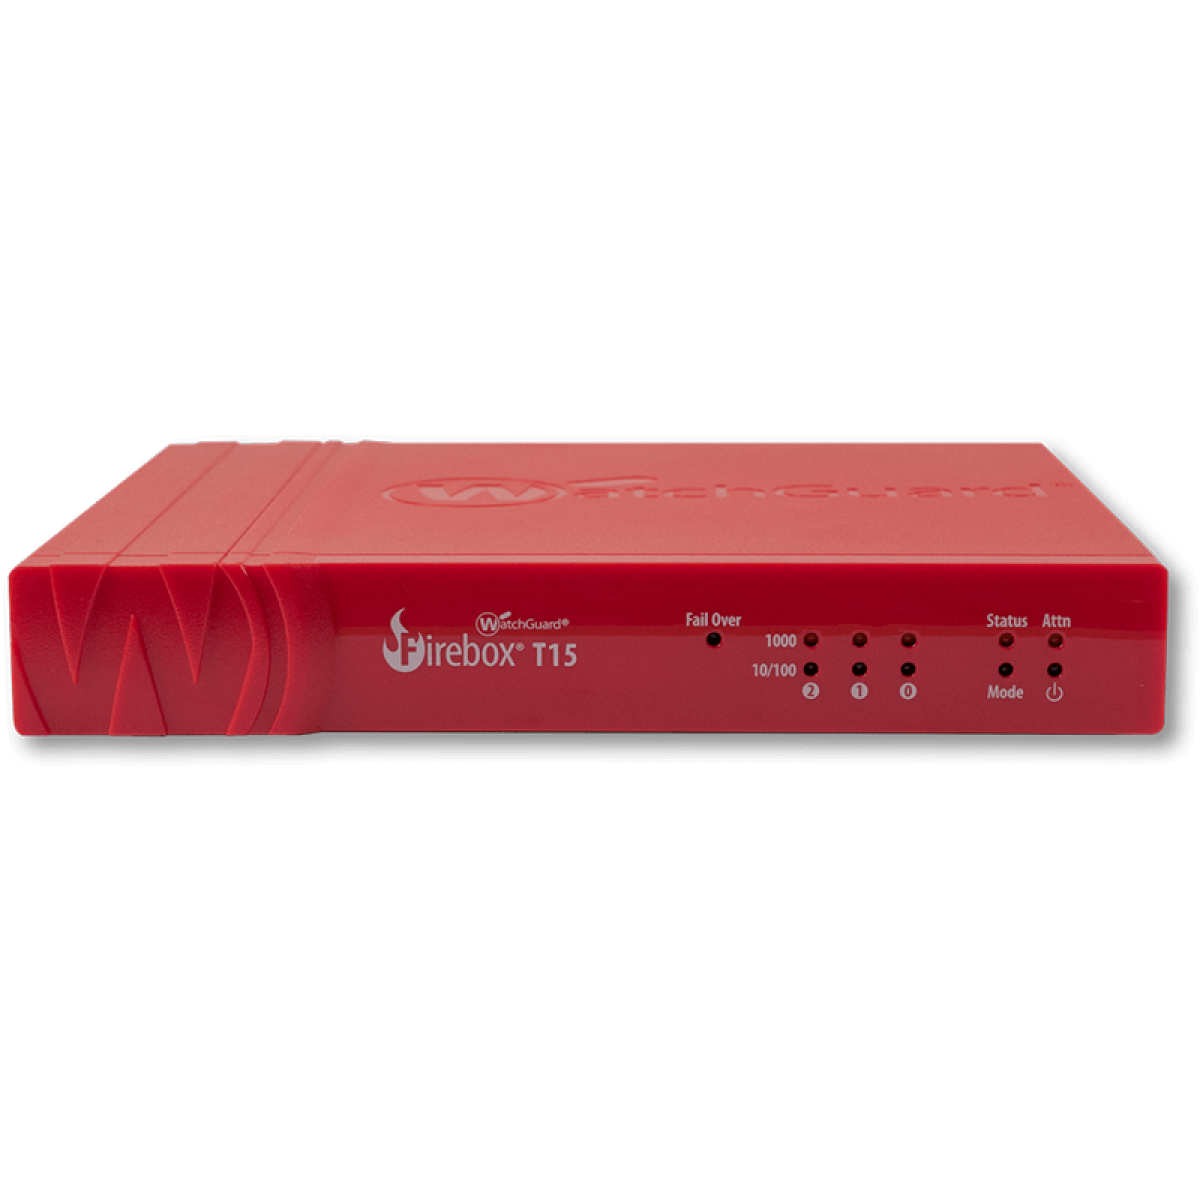 Trade up to WatchGuard Firebox T15 with 1-yr Total Security Suite